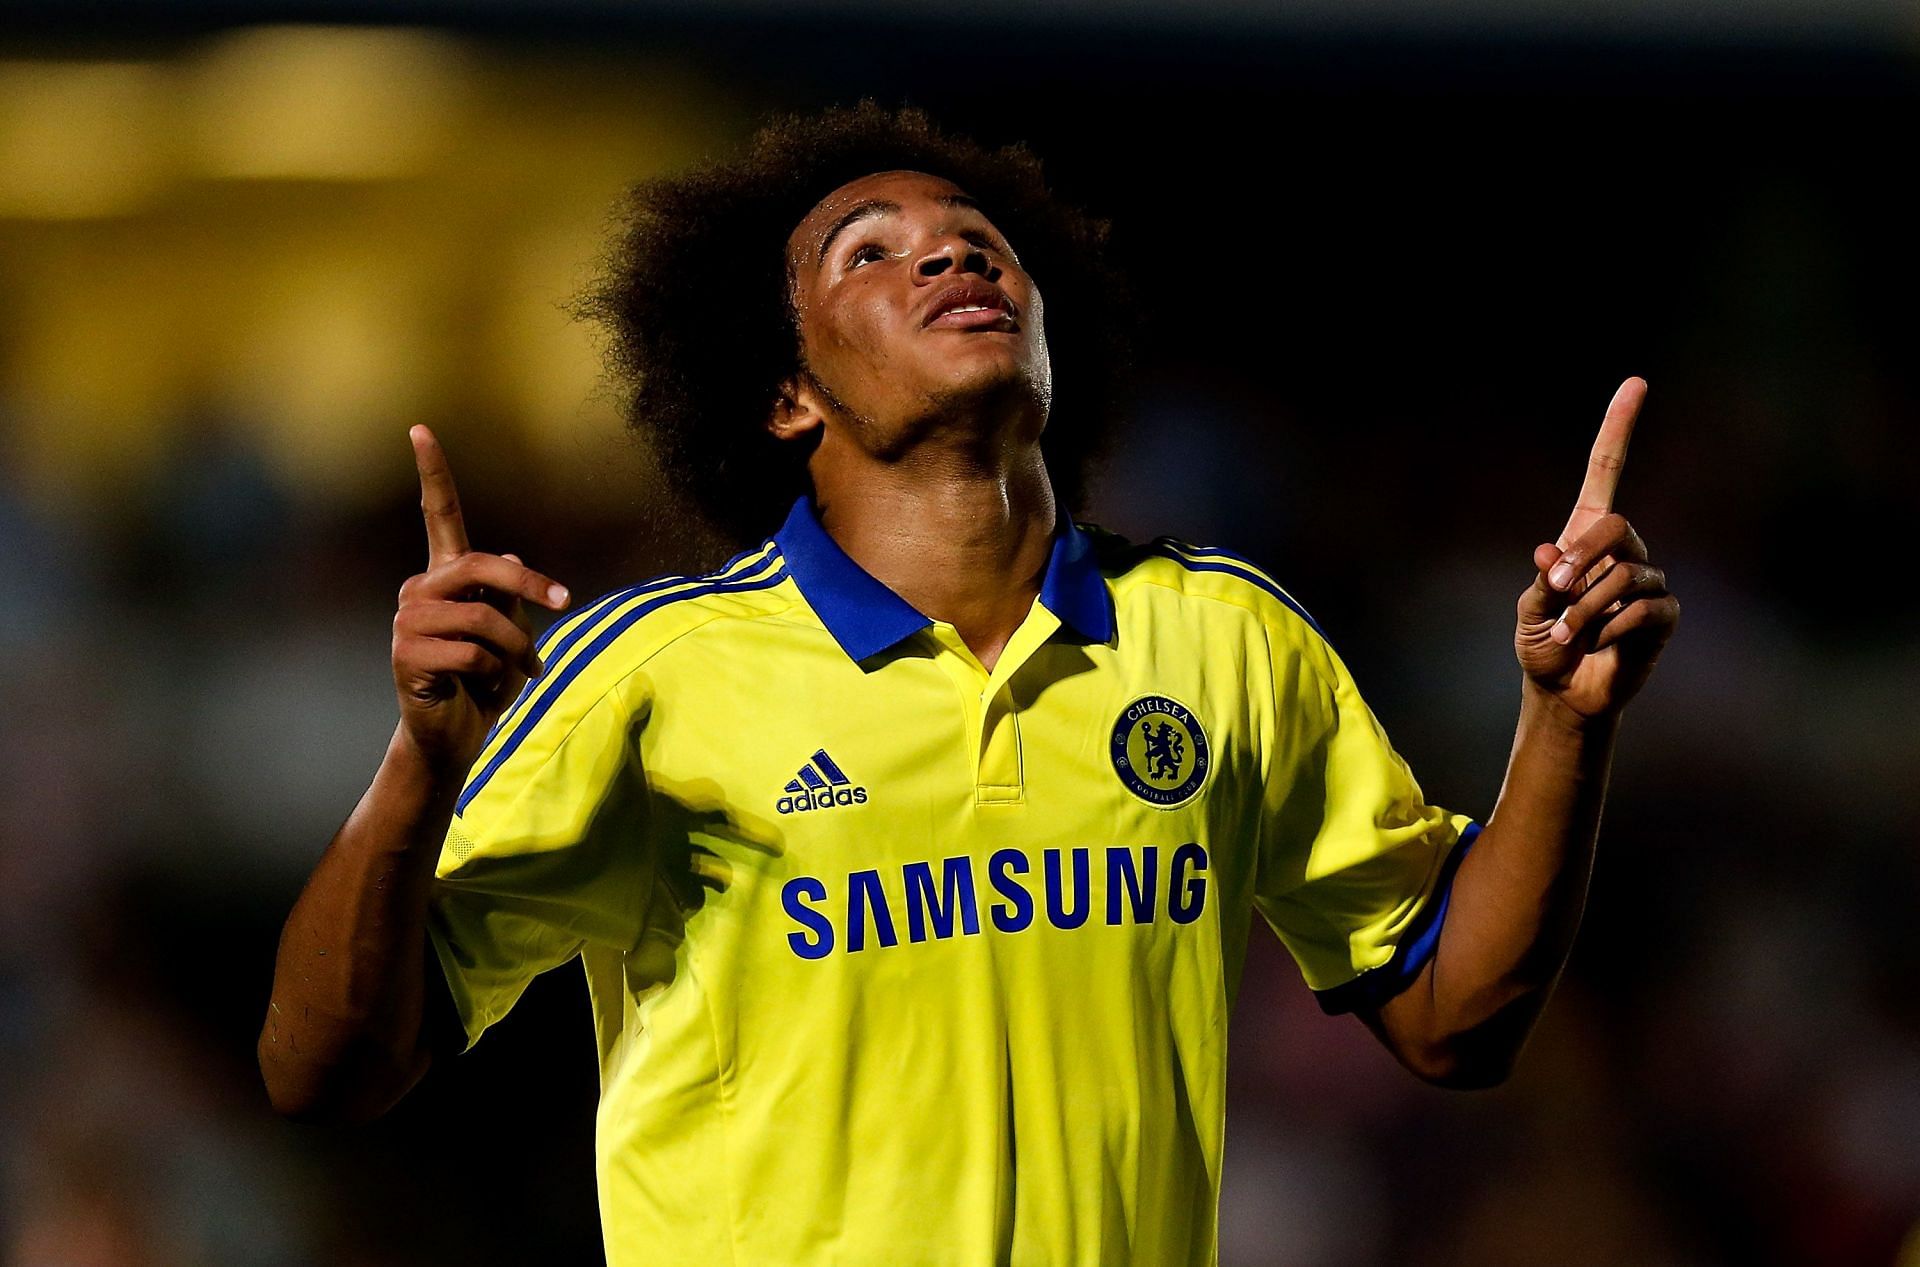 Izzy Brown completed a move to Chelsea from West Brom very early